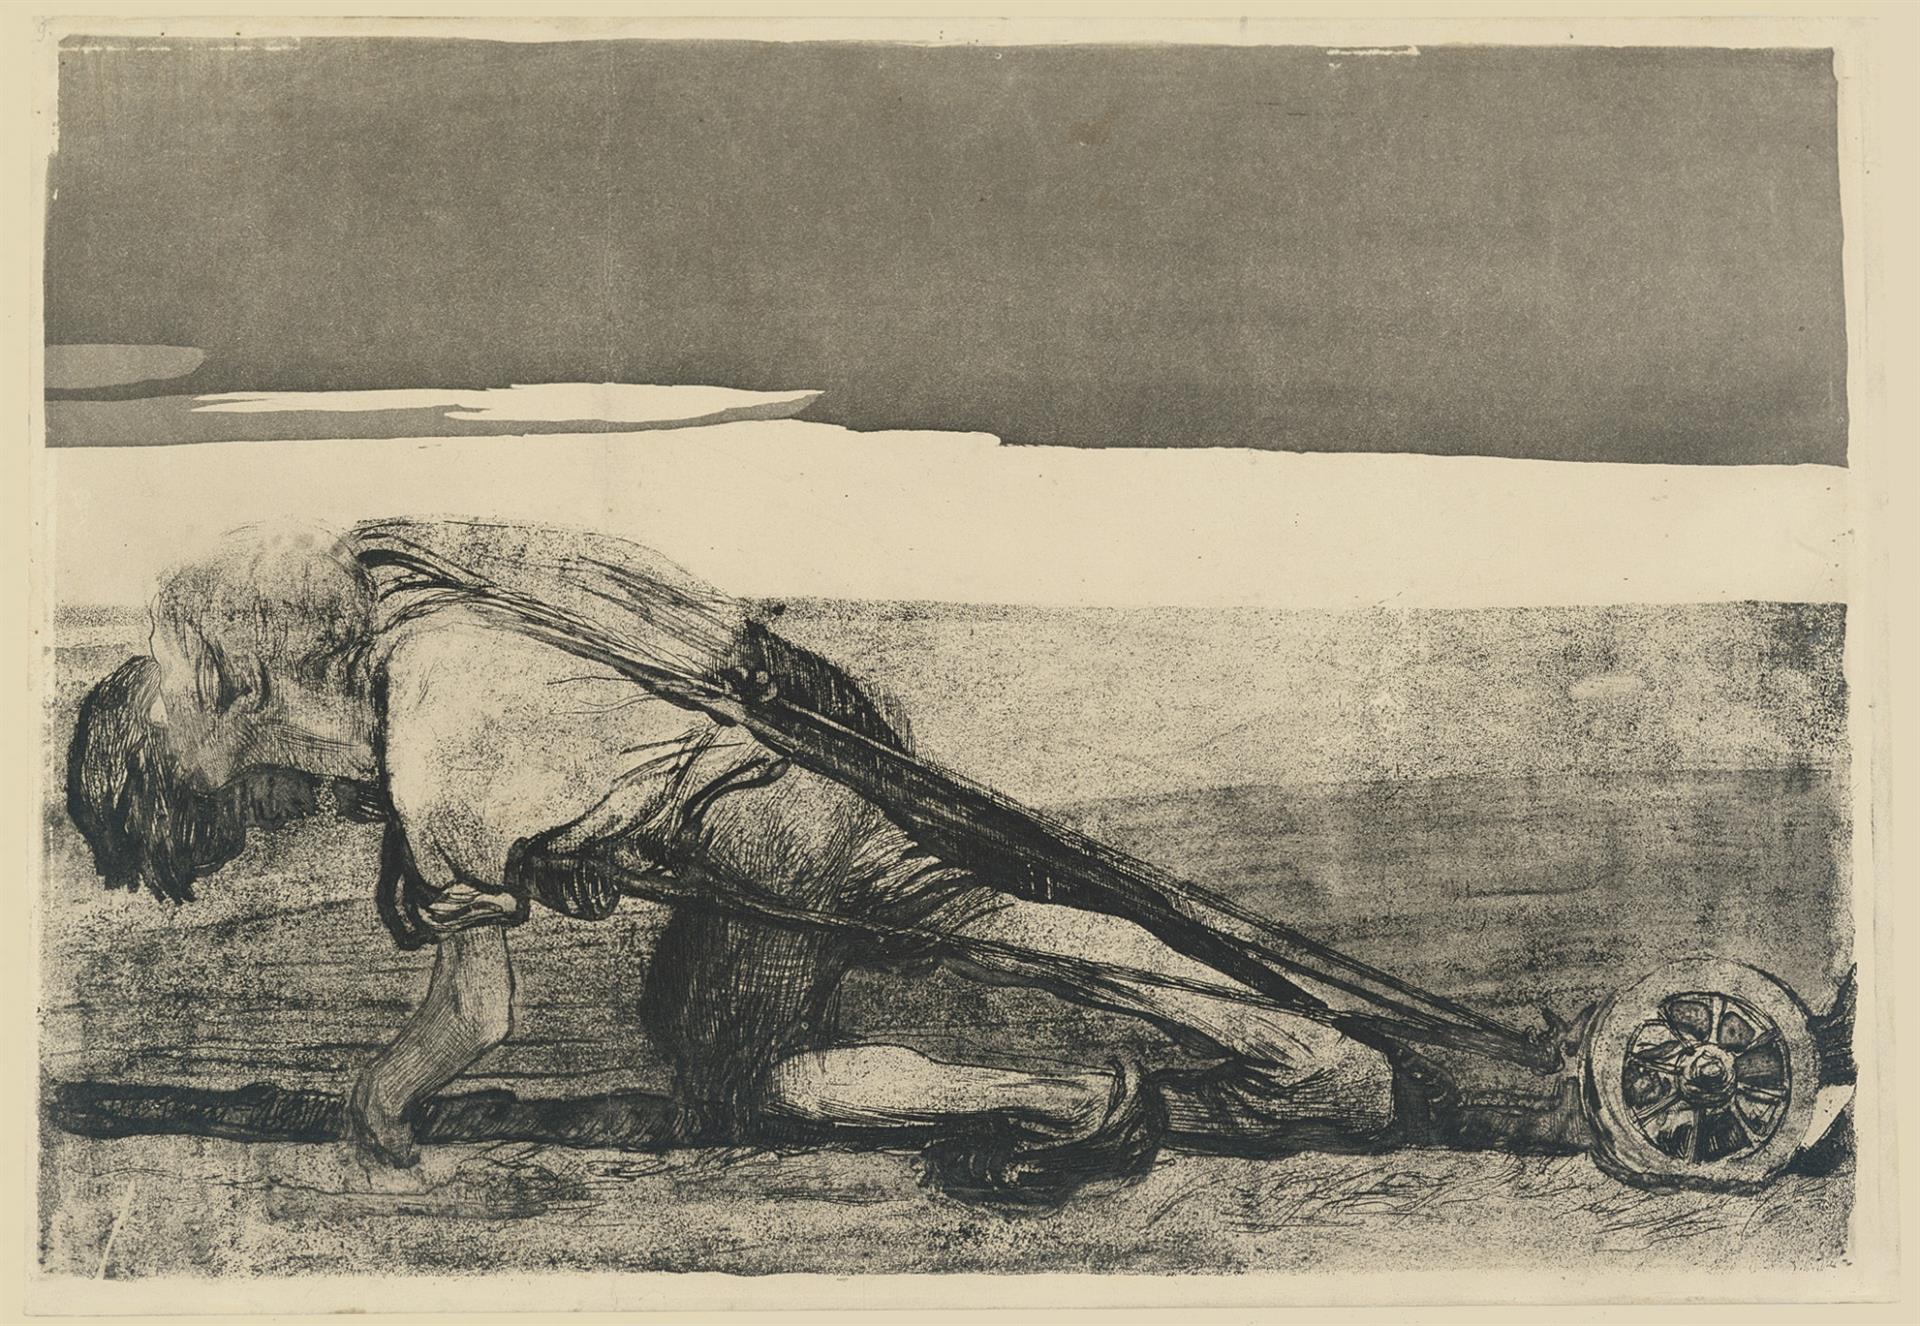 Käthe Kollwitz, The Ploughmen, fourth proof of sheet 1 for the »Peasants War« cycle, before mid-January 1907, line etching, drypoint, aquatint, reservage, sandpaper and soft ground with imprint of Ziegler's transfer paper, Kn 99 IV, Cologne Kollwitz Collection © Käthe Kollwitz Museum Köln